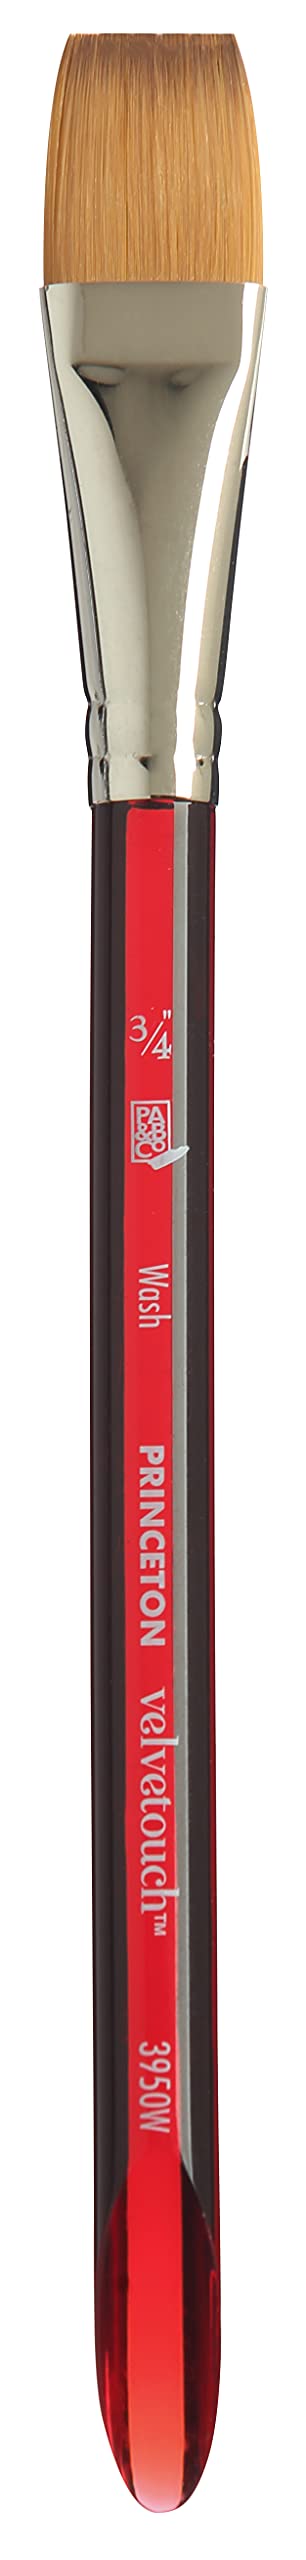 Princeton Velvetouch Series 3950 Paint Brush for Acrylic Oil and Watercolor  Angle Shader 1/2 Inch